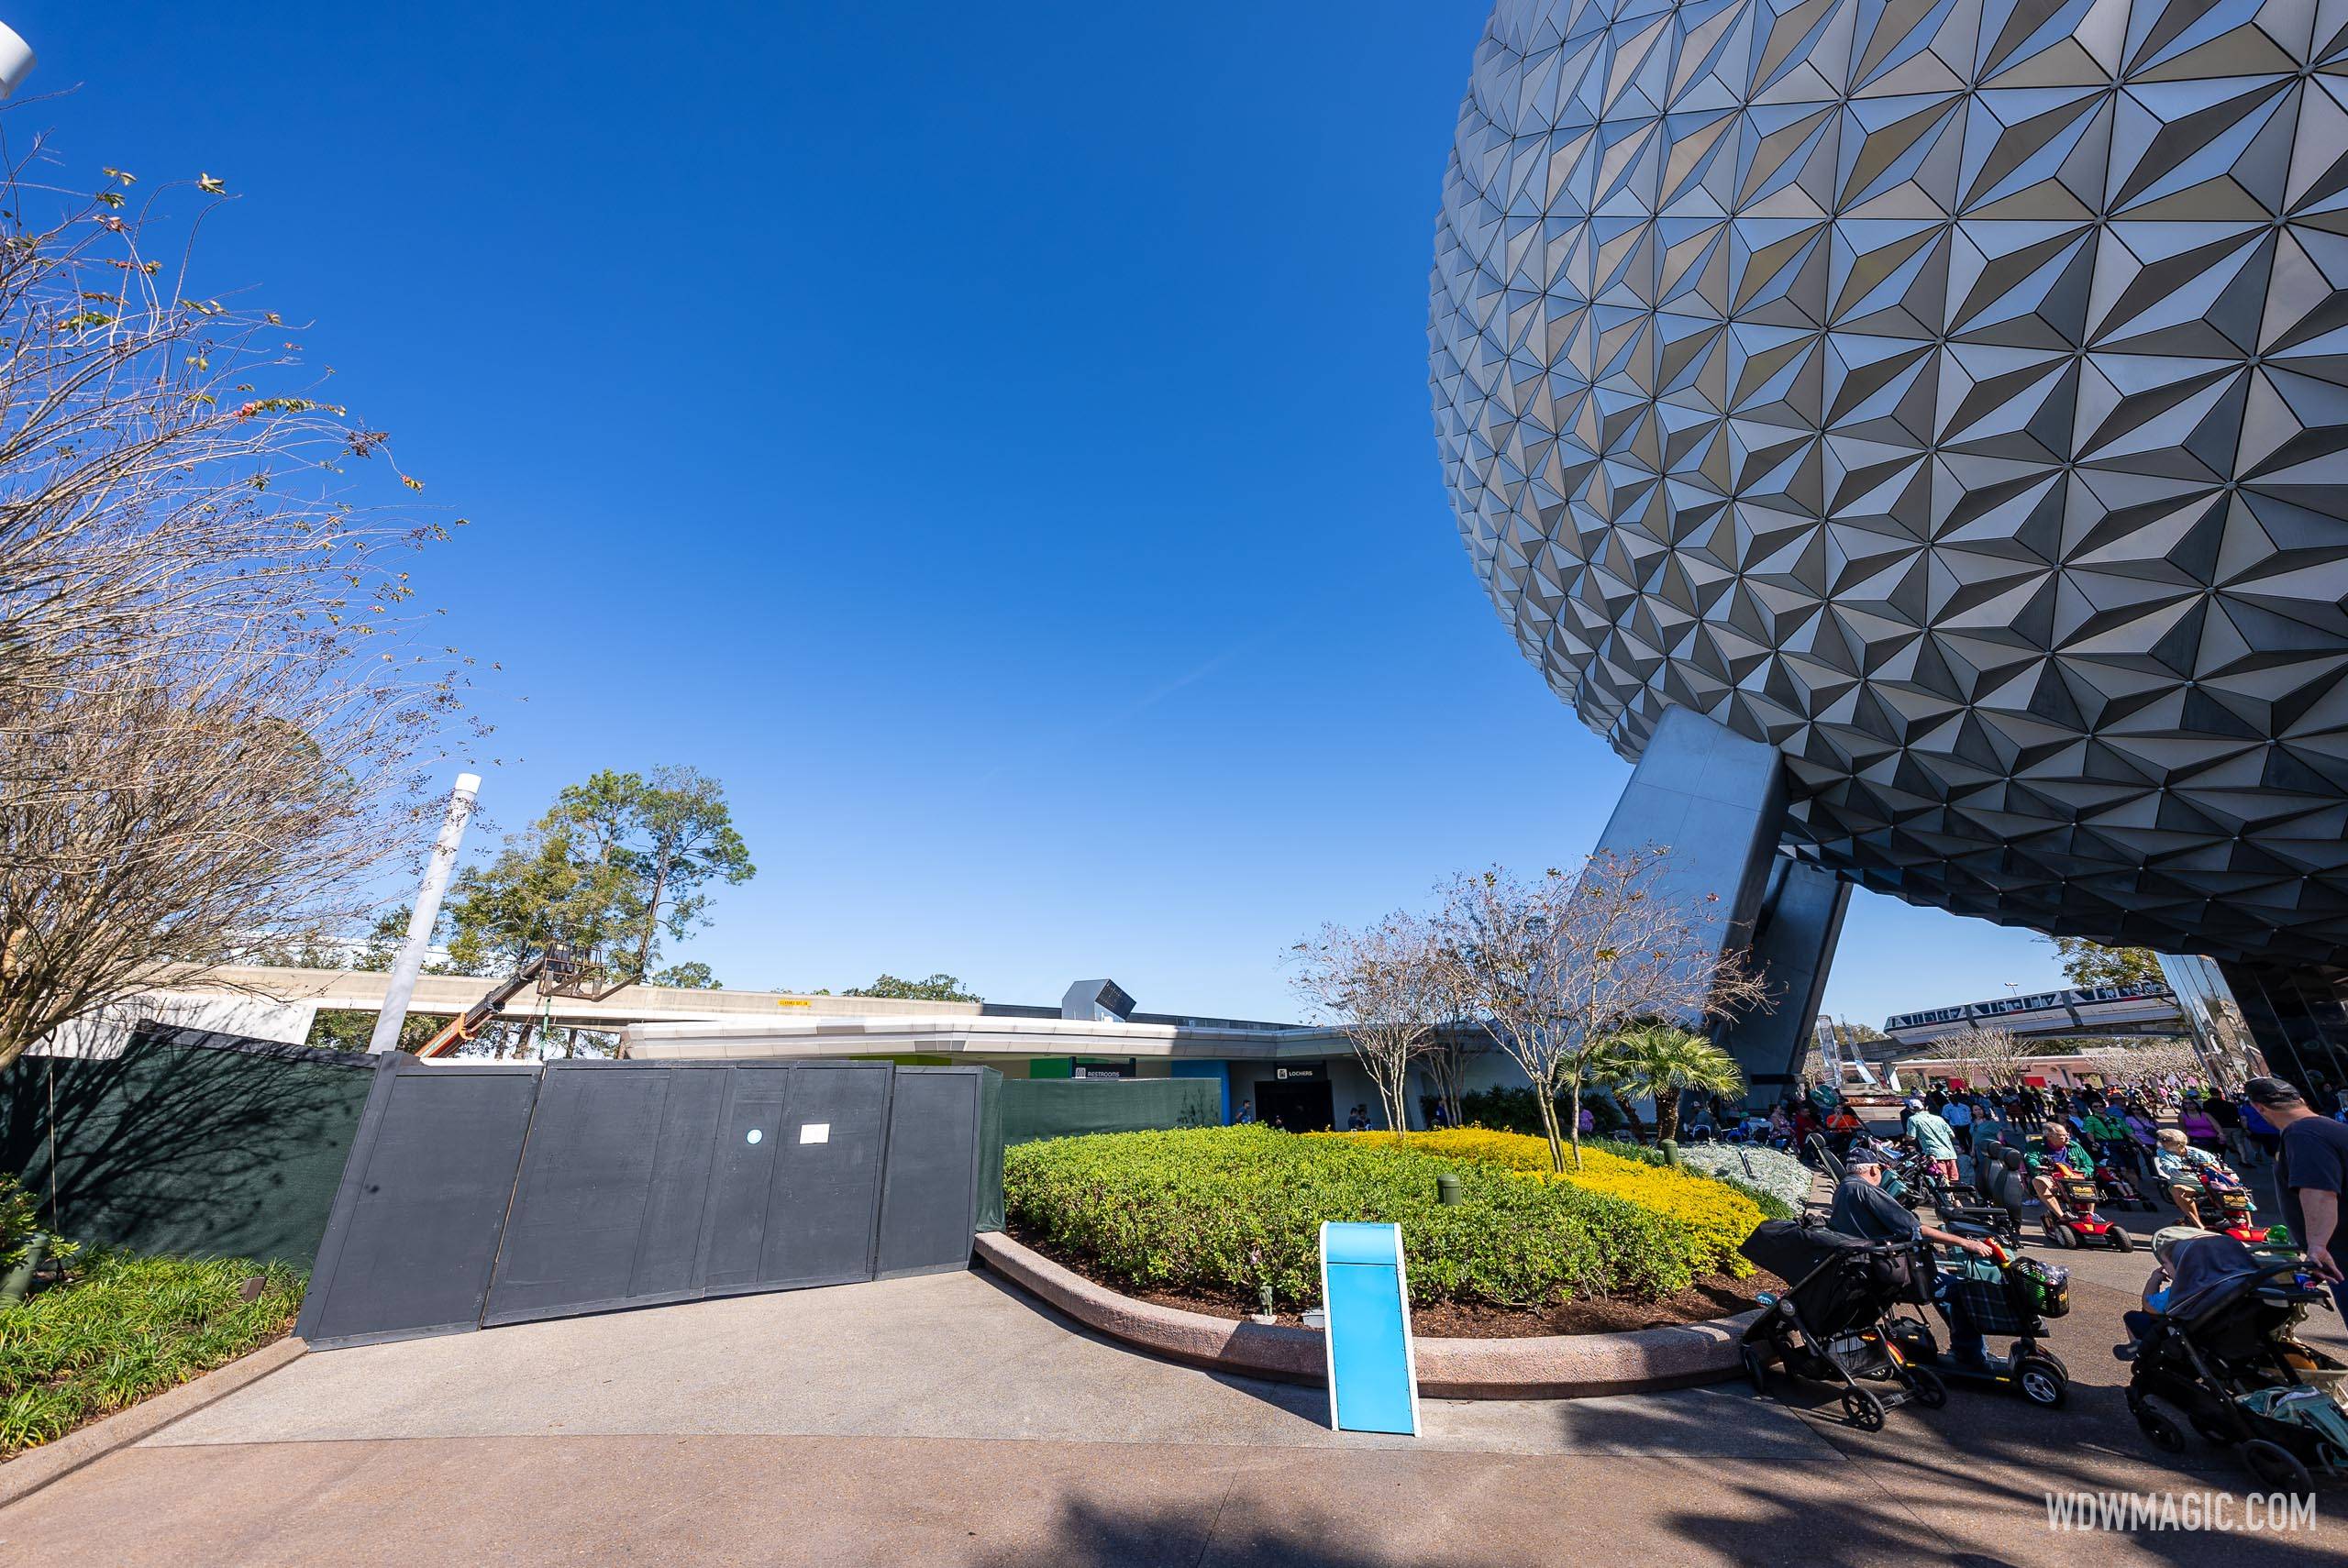 New backstage gate installed at former EPCOT Future World bypass